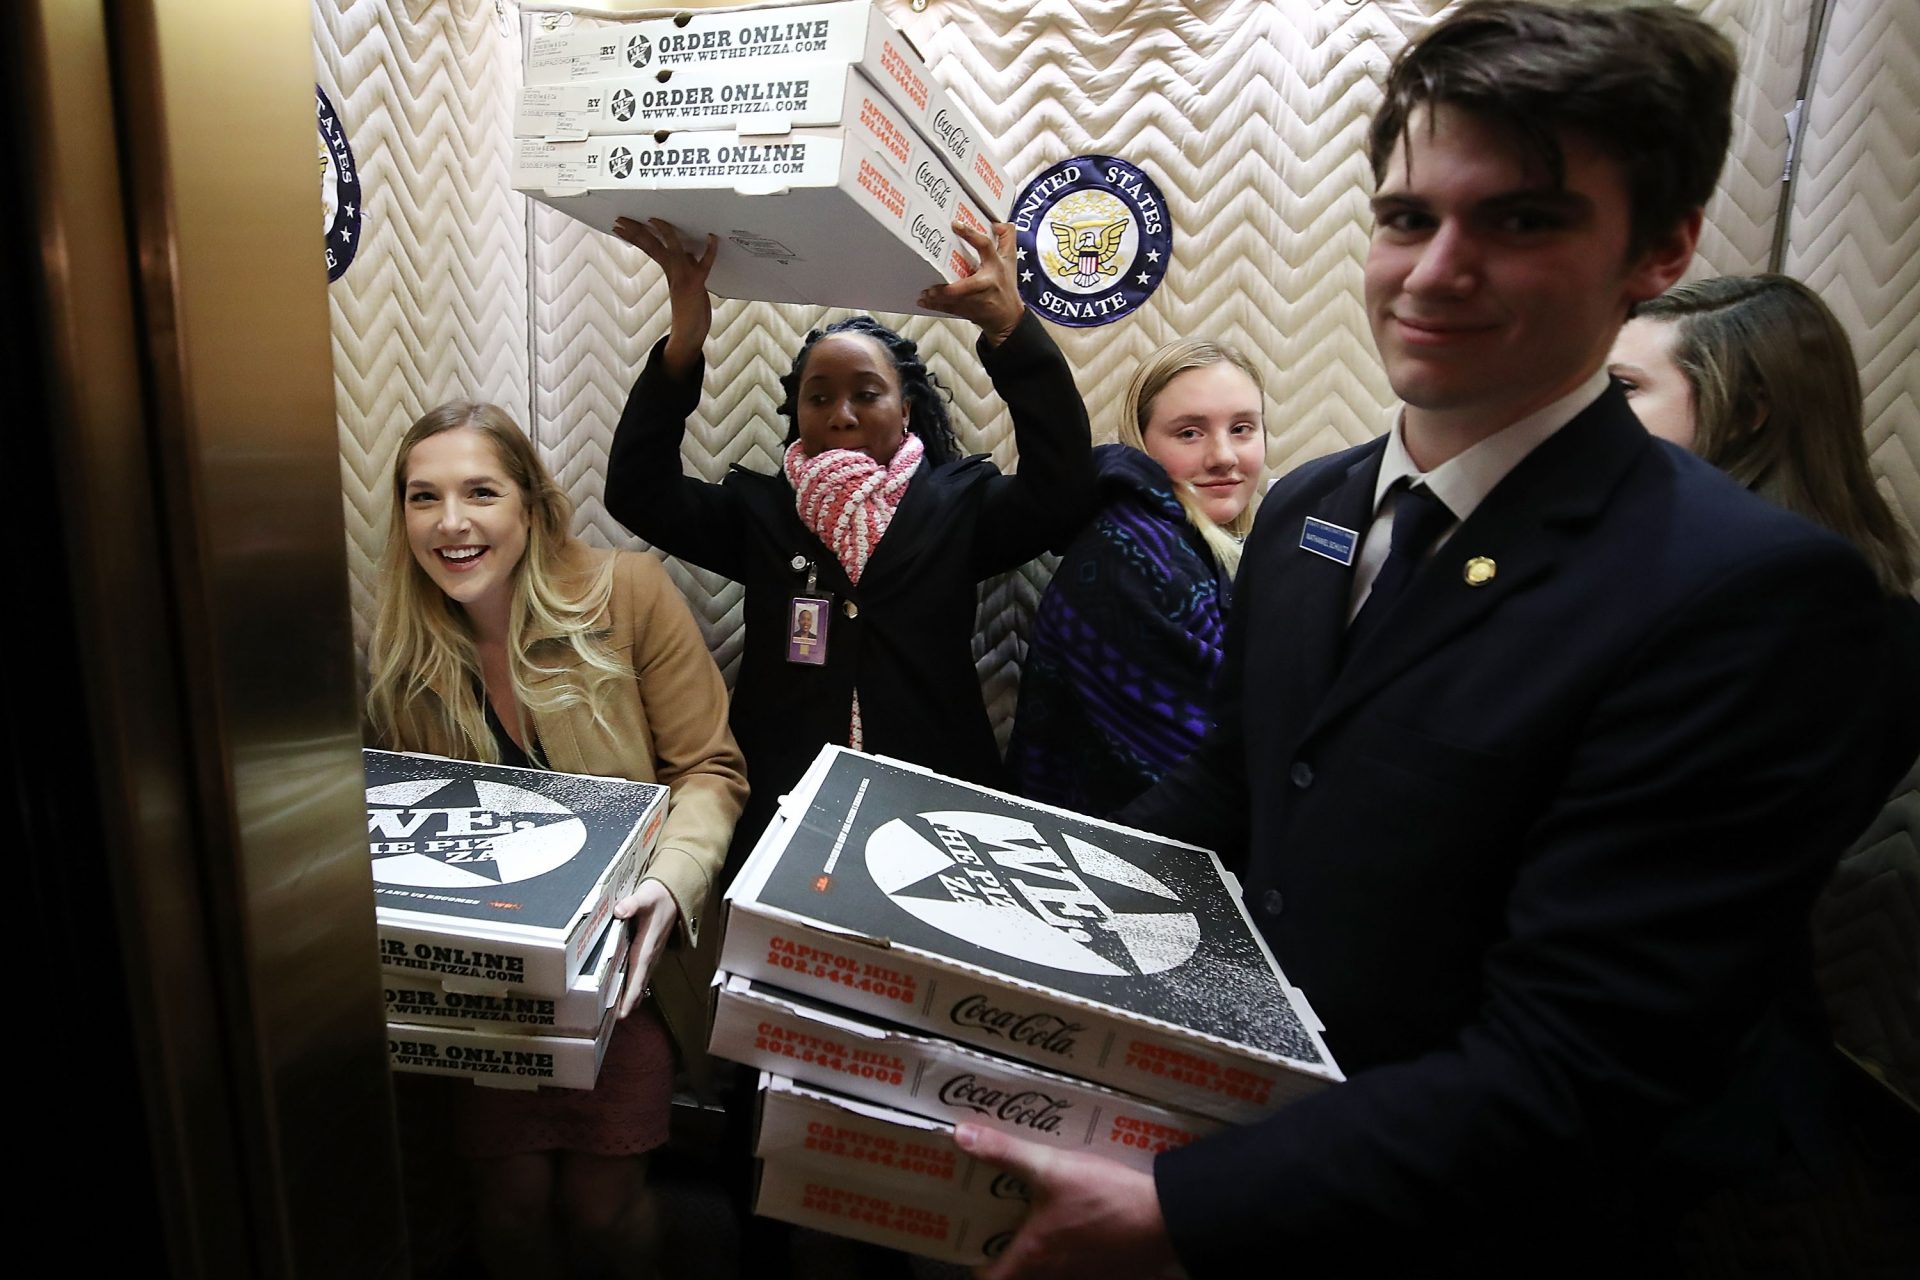 What the Pizza Meter can tell you about Washington politics